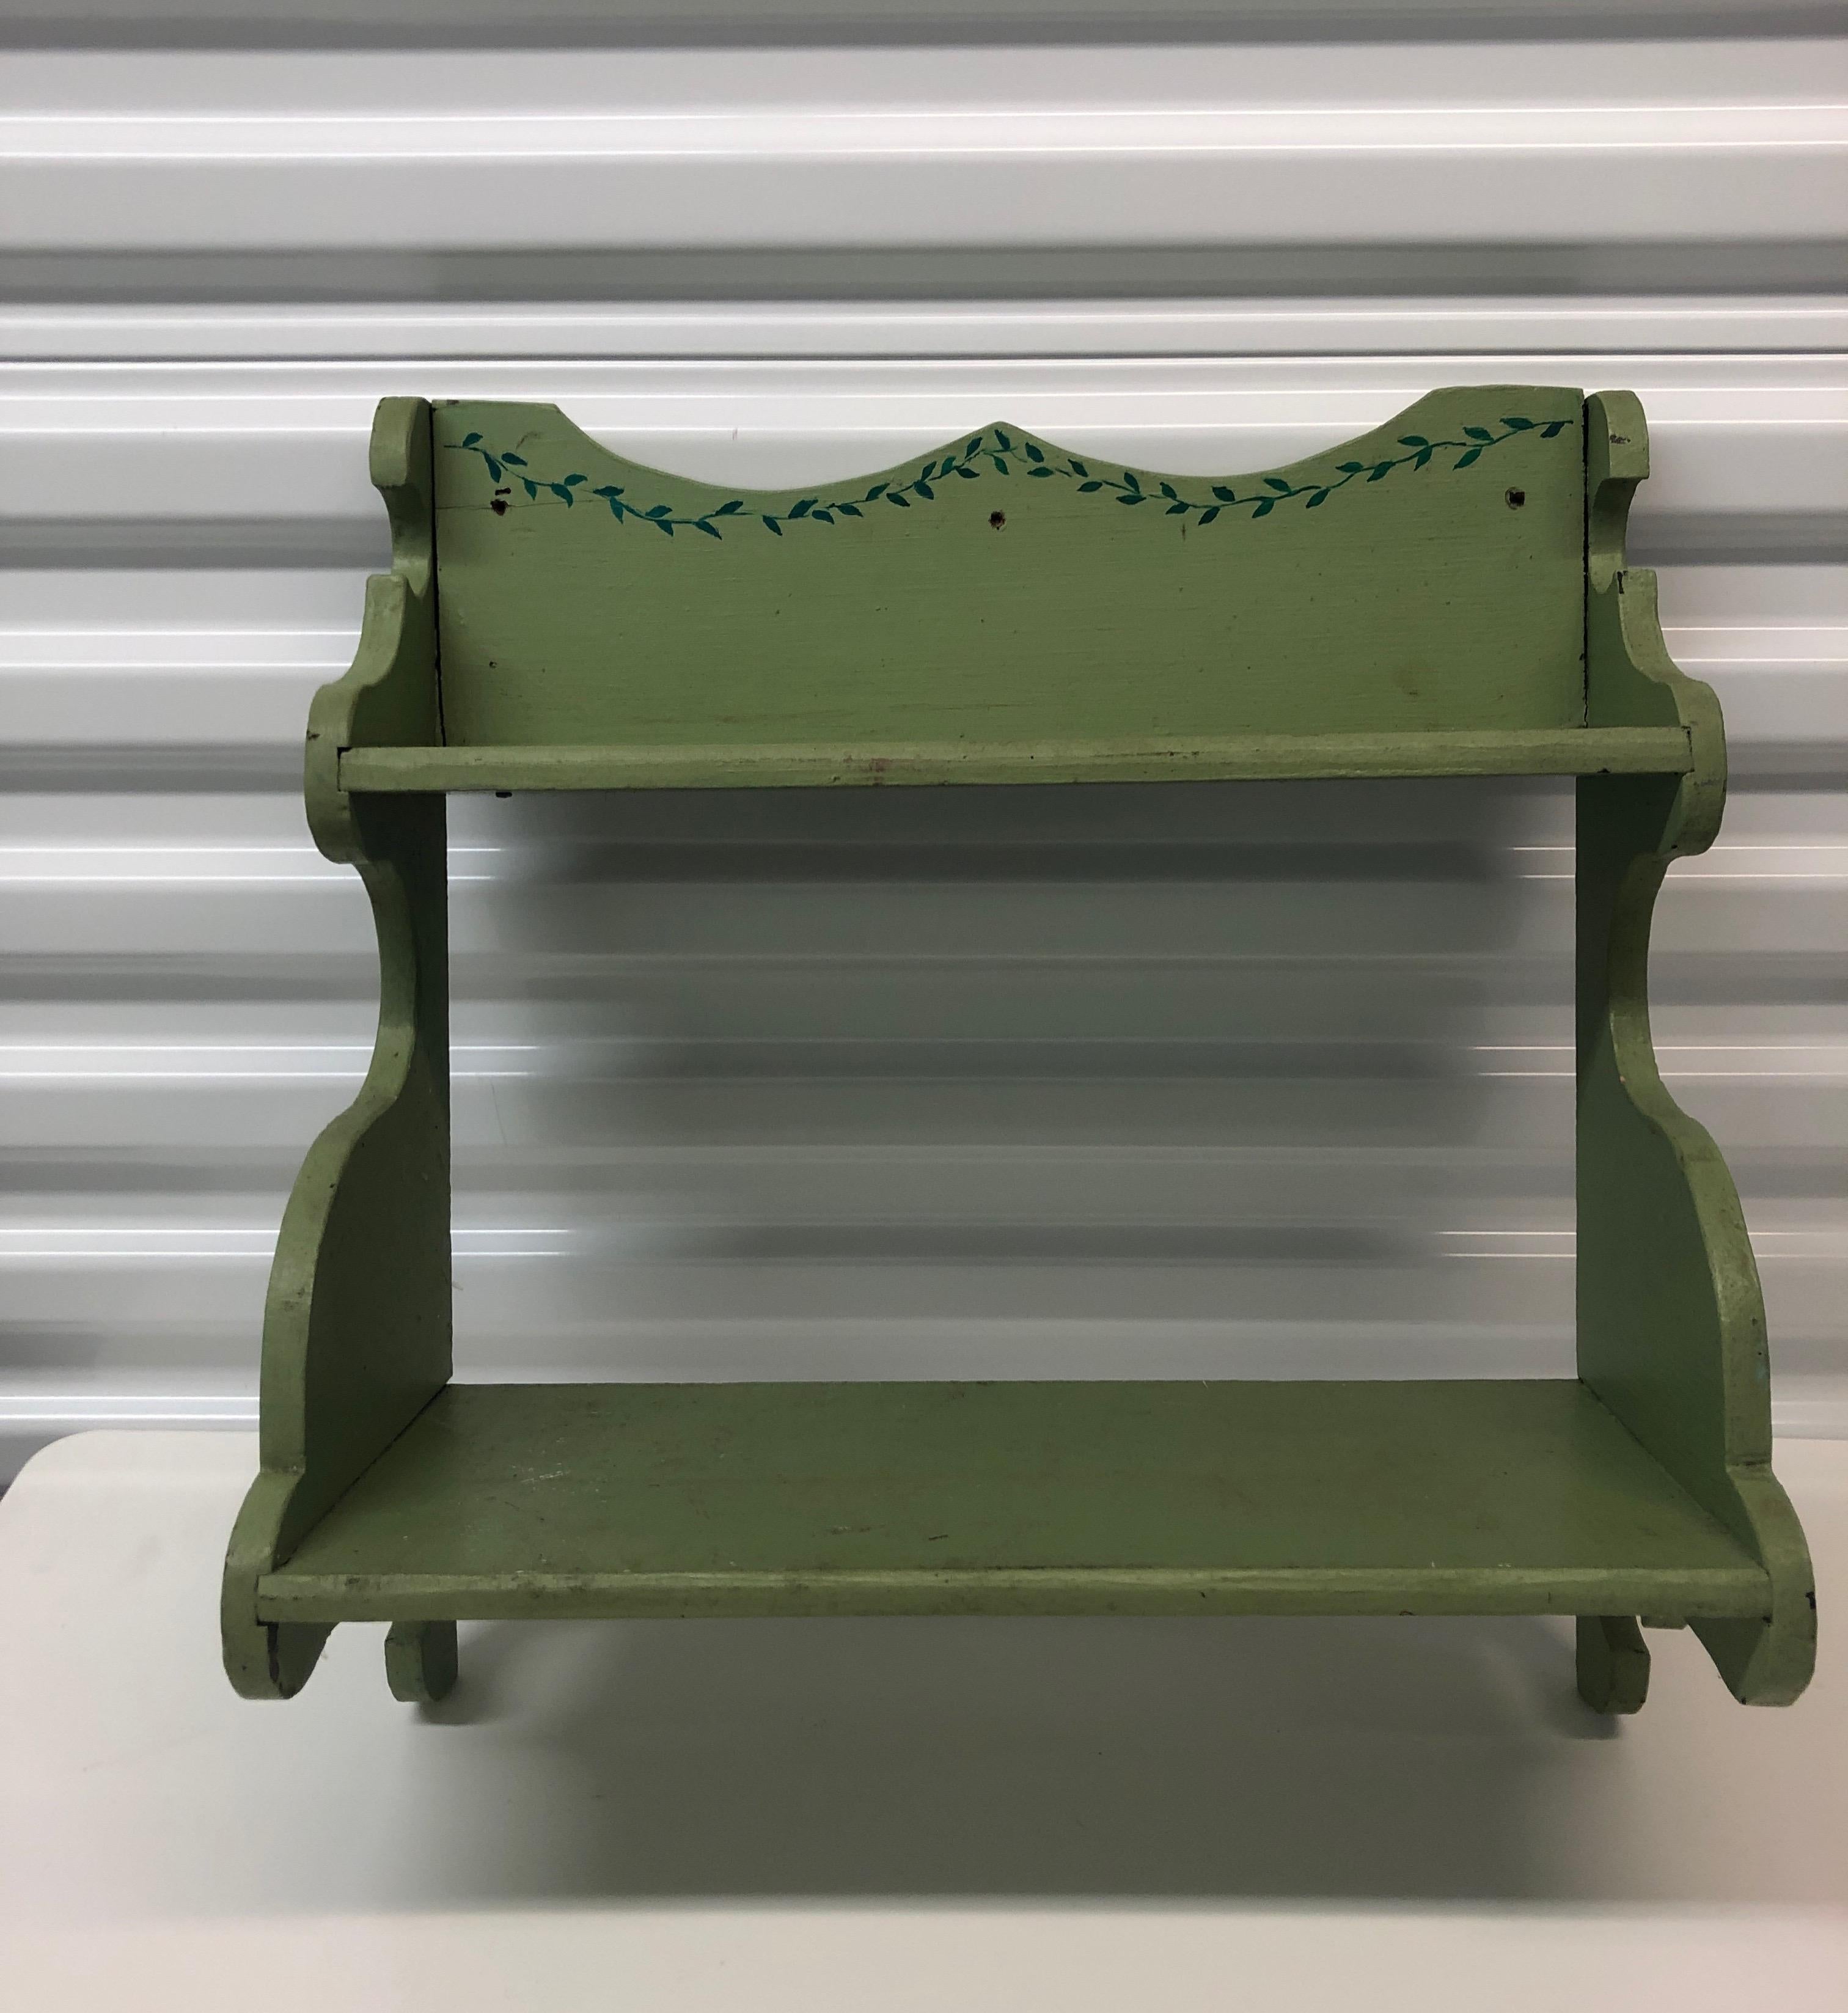 Hand painted wooden country wall display shelf.
Green high gloss paint with royal blue details.
Three small holes to either nail it or screw it to the wall or door.
Size: 18” H x 17” W x 7.5” D.